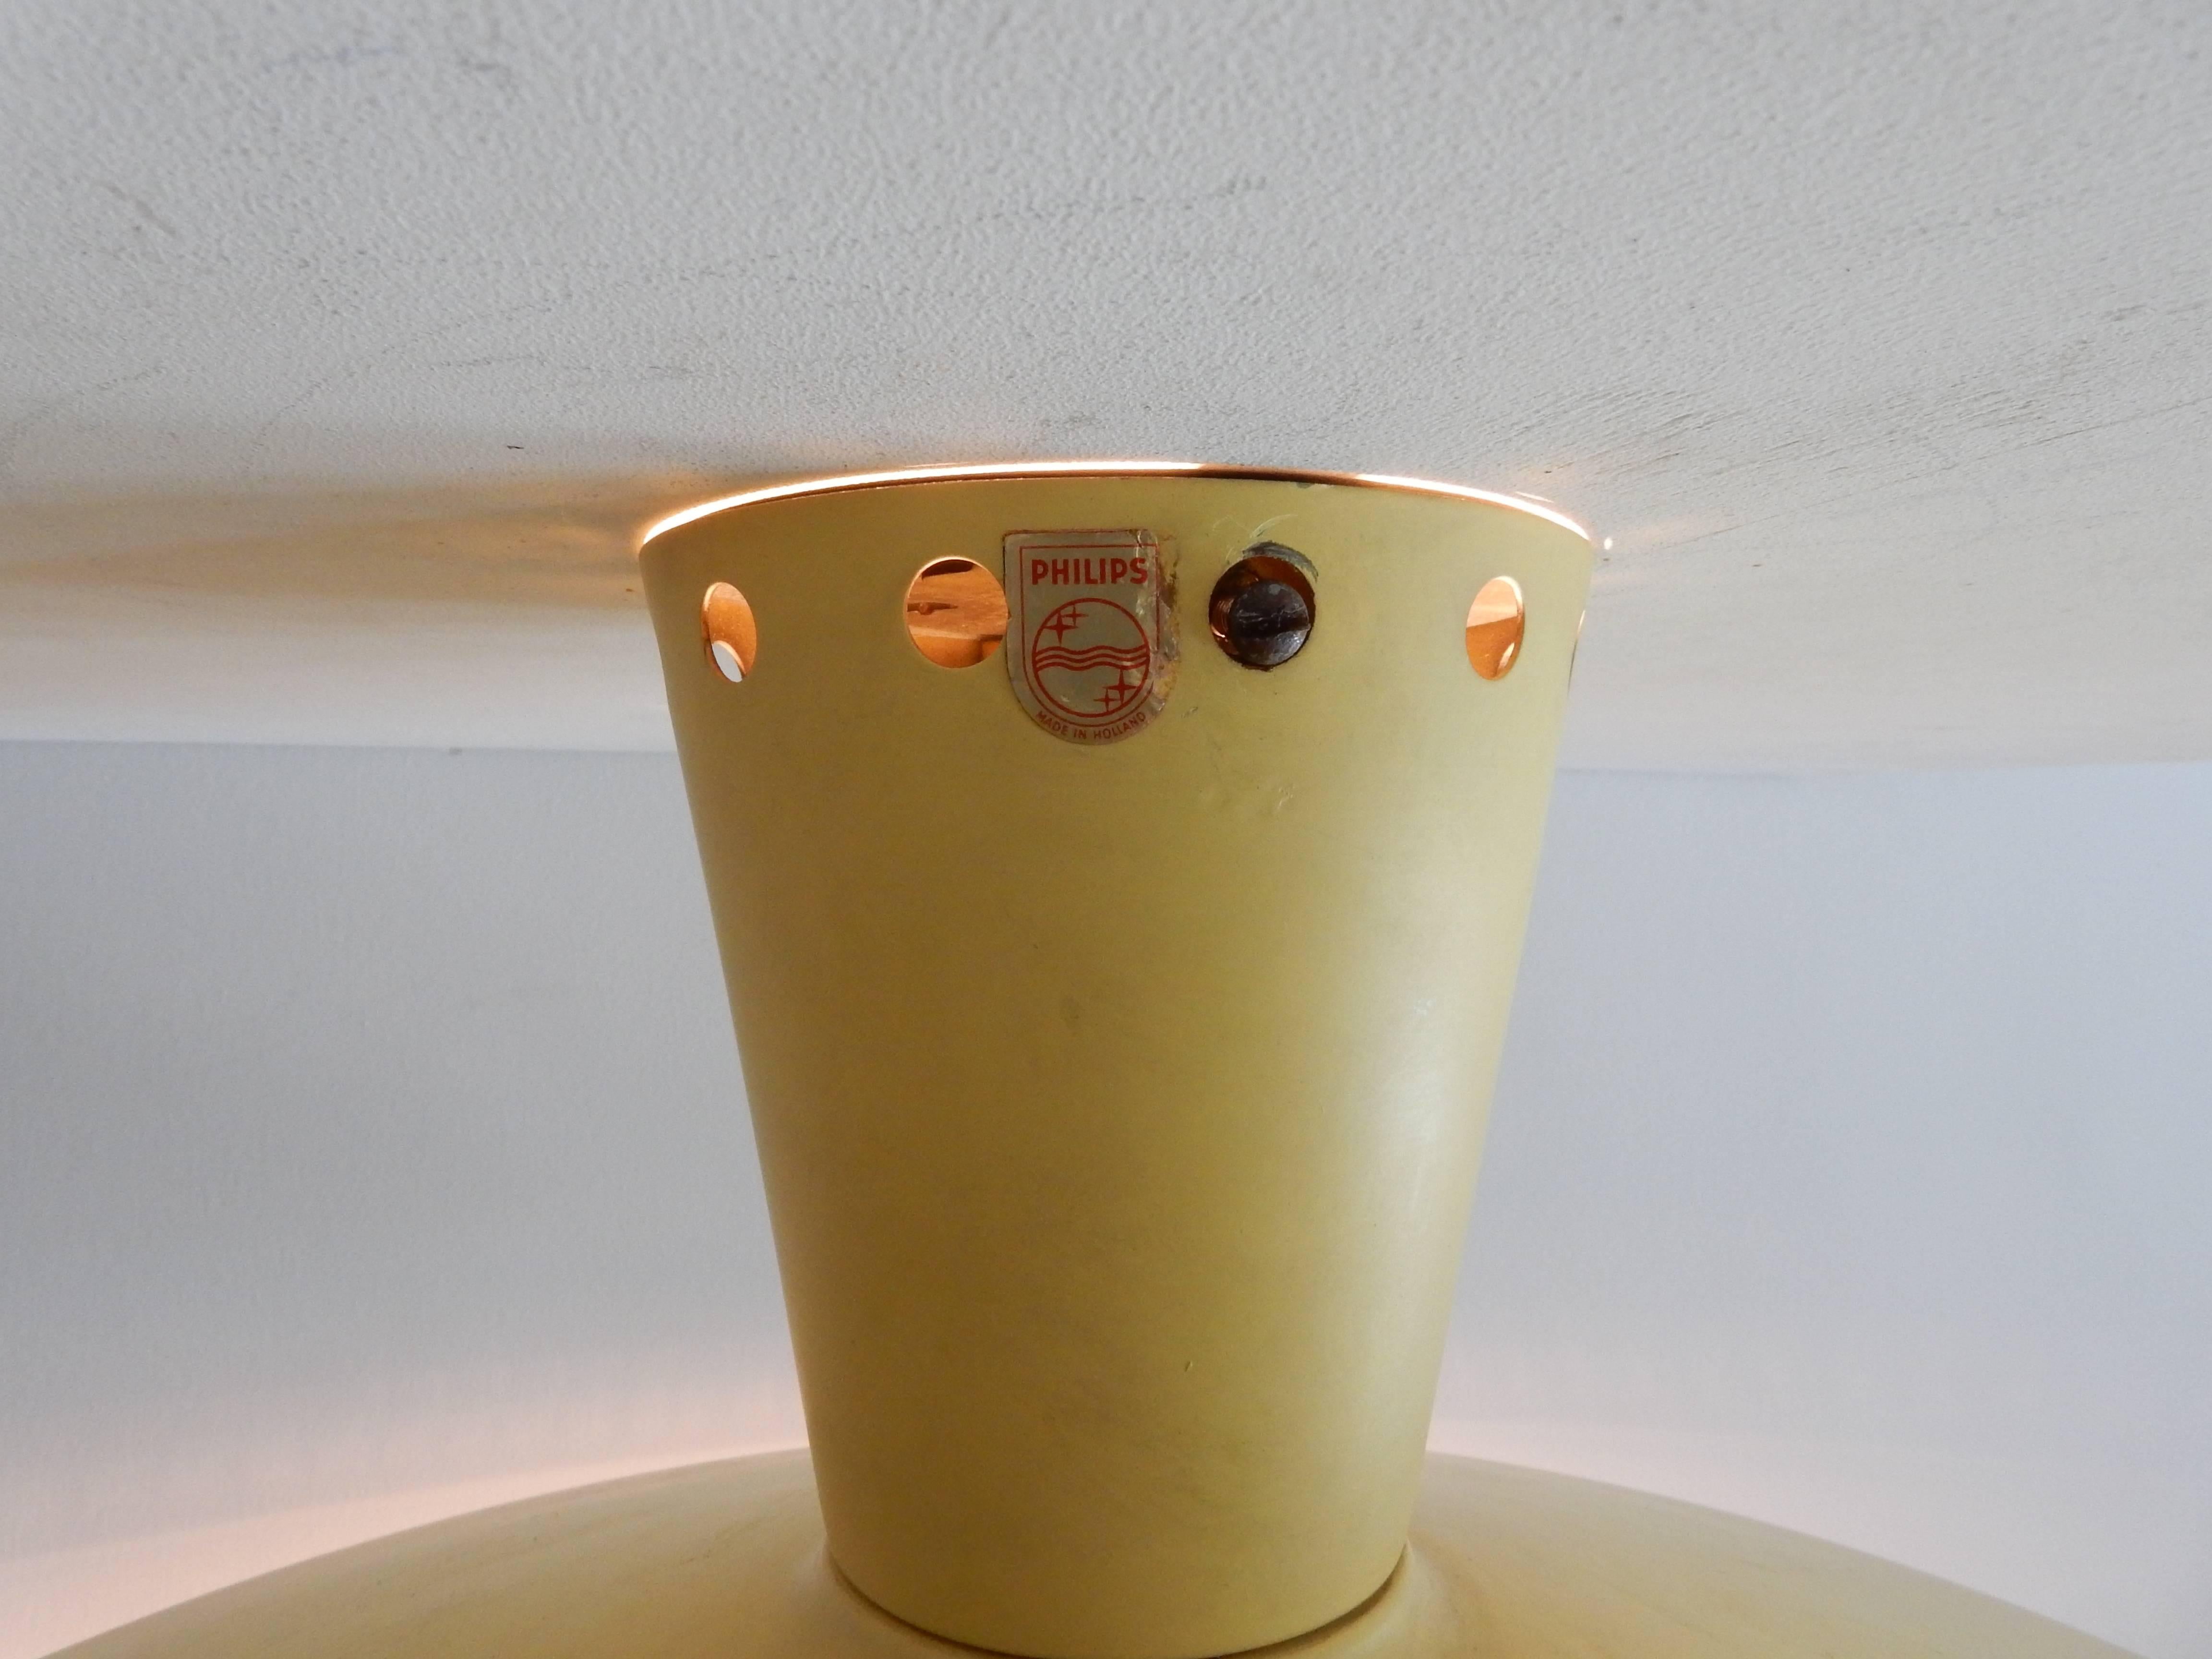 Probably the most famous industrial ceiling light from the Netherlands. A design by Louis Christiaan Kalff for Philips, designed in the late 1950s. This model is cataloged as model NB93 E/00. The E/00 represents the color. This light was available